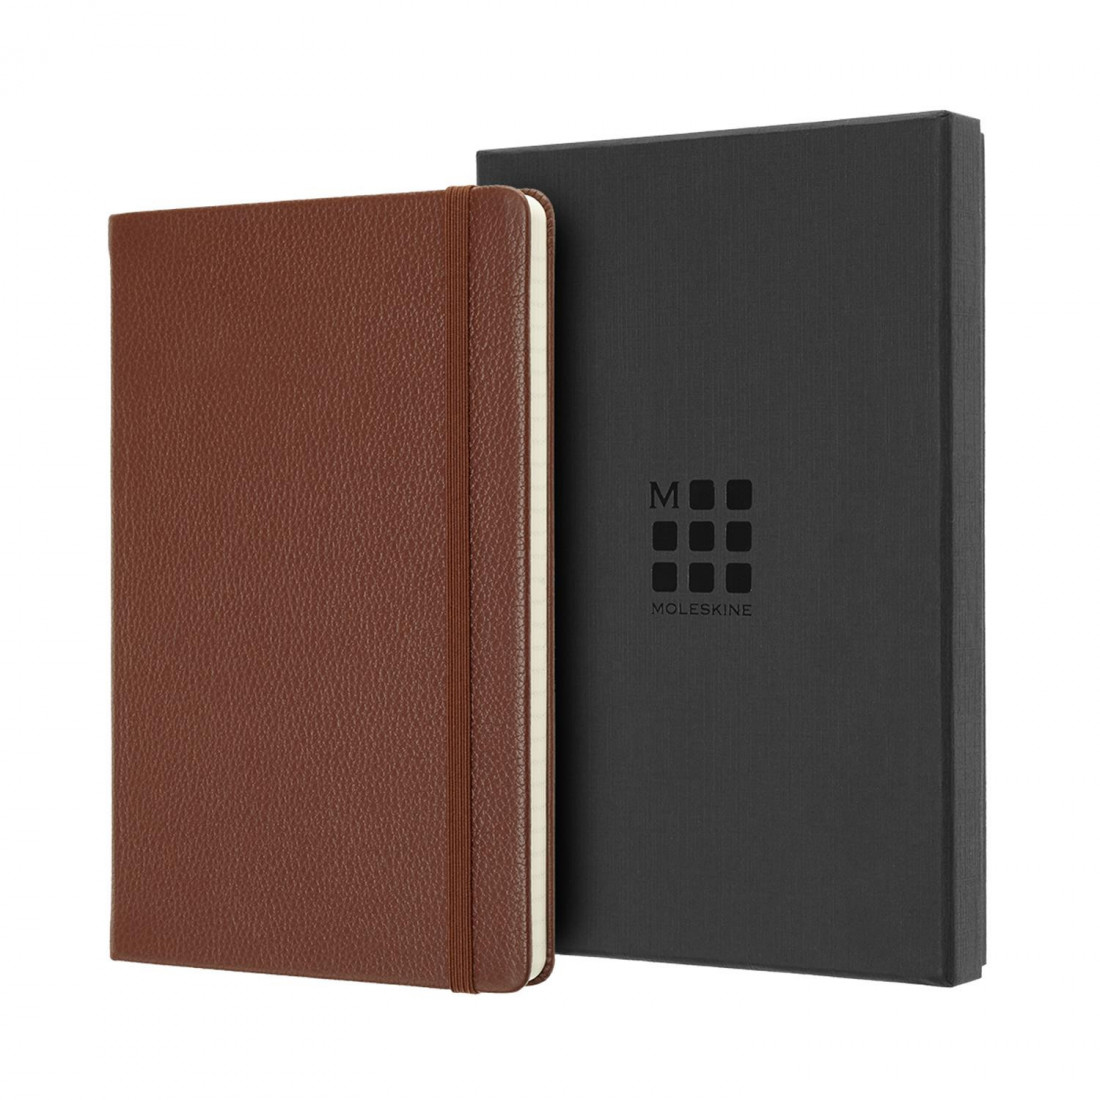 Notebook Limited Edition Leather Sepia Brown Large 13x21 Moleskine